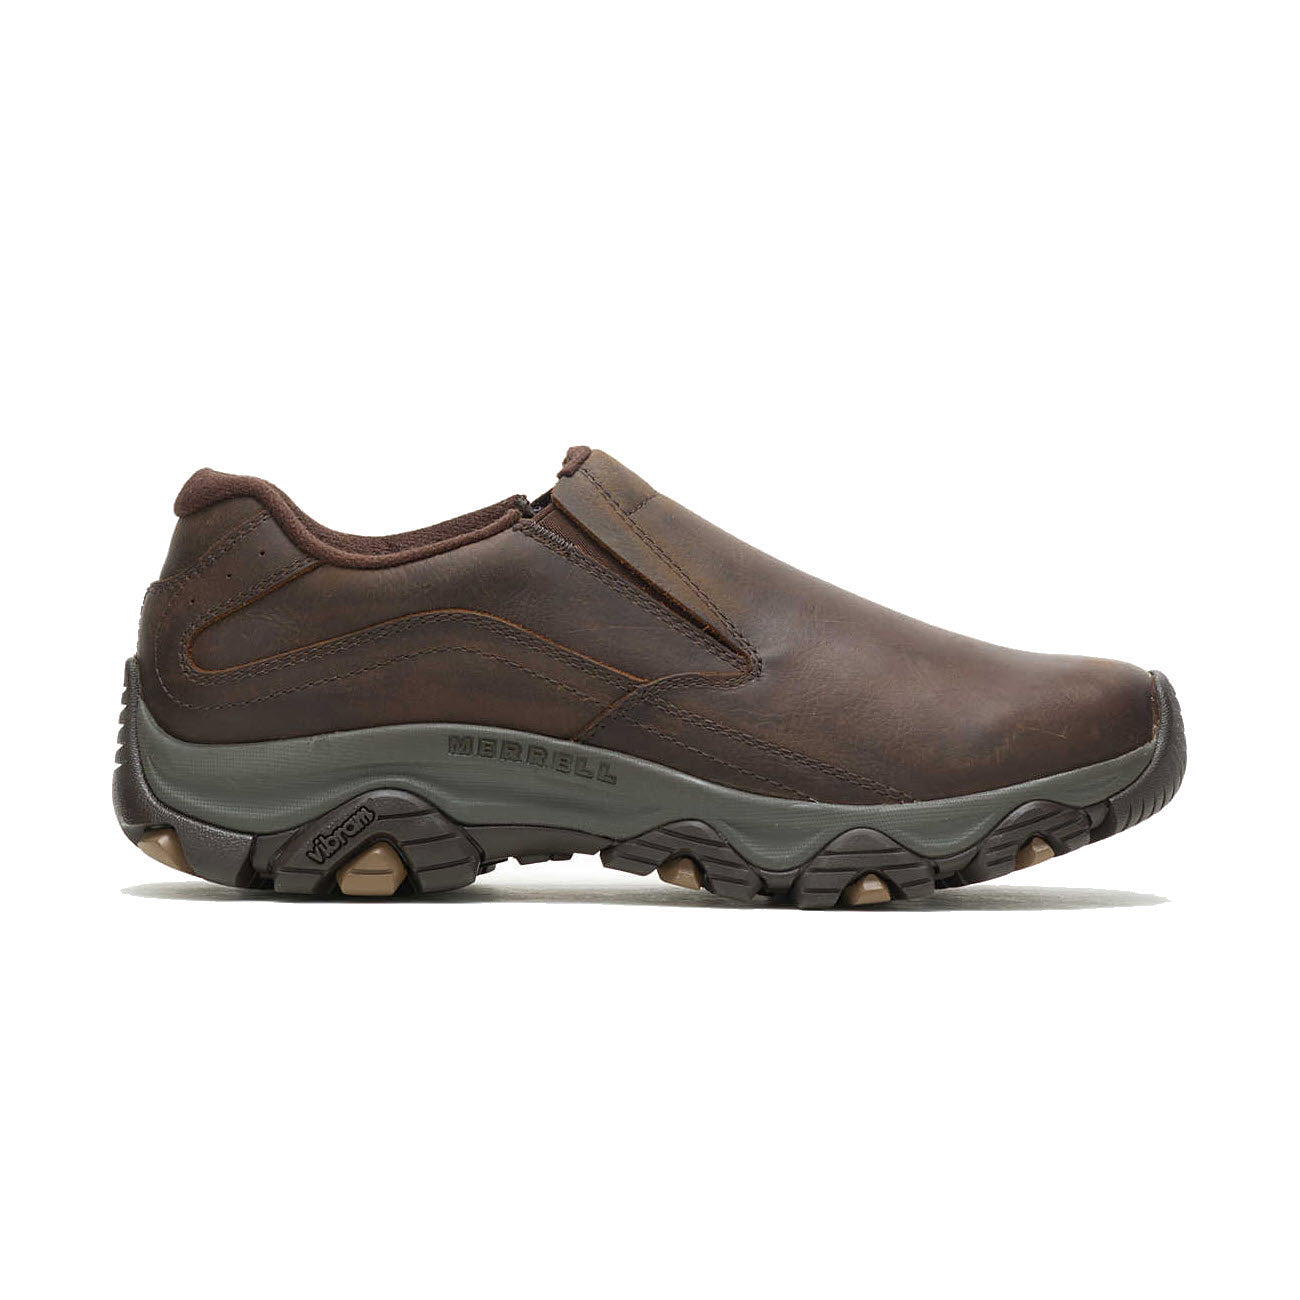 A brown waterproof full grain leather Merrell men's slip-on shoe with elastic side panels and a rugged rubber sole, displayed against a white background.